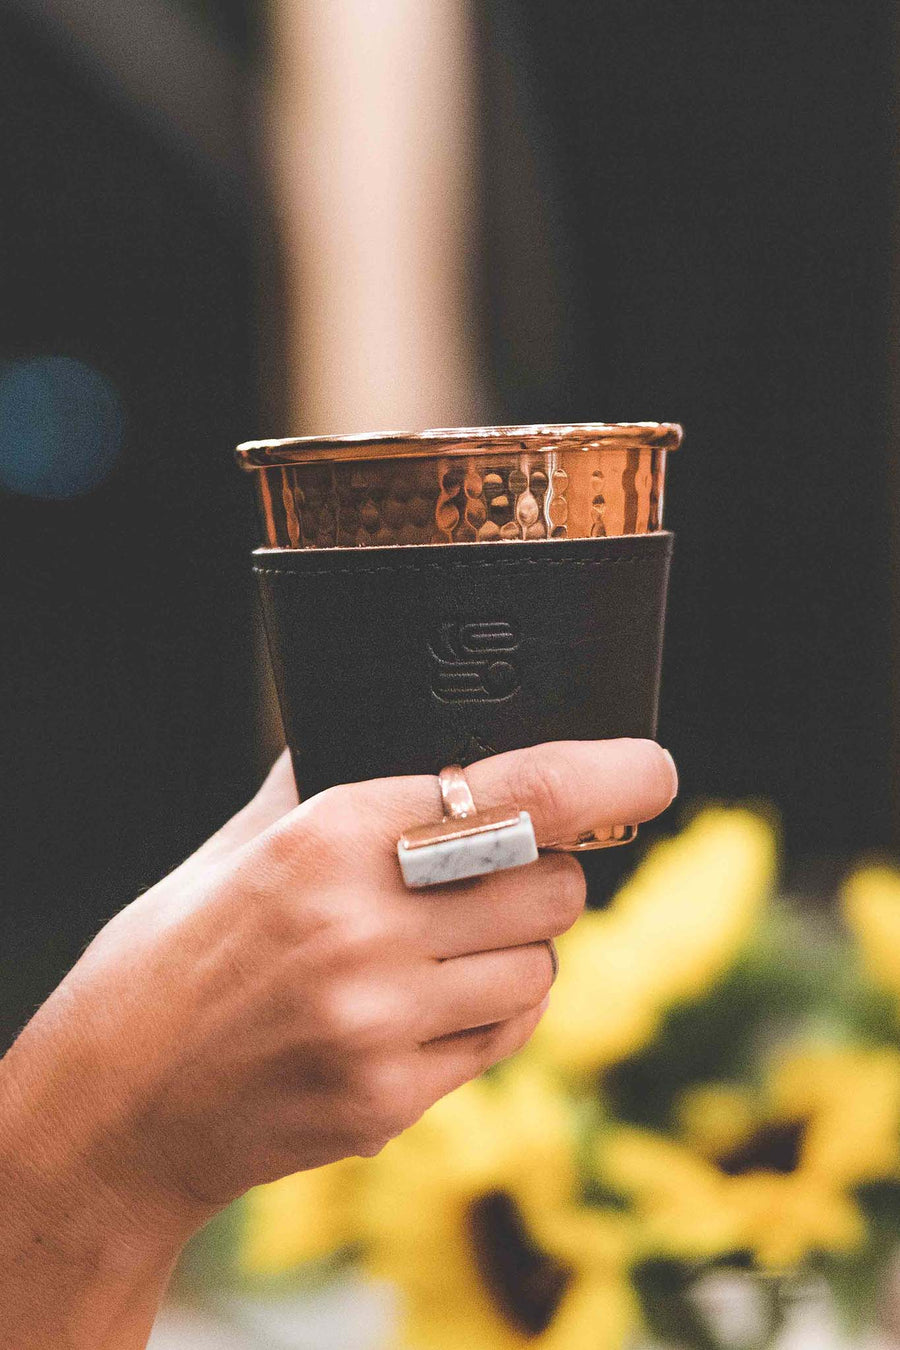 Hammered copper cup with black leather sleeve stamped with Sound As Ever Logo held up by a hand with a copper and white ring